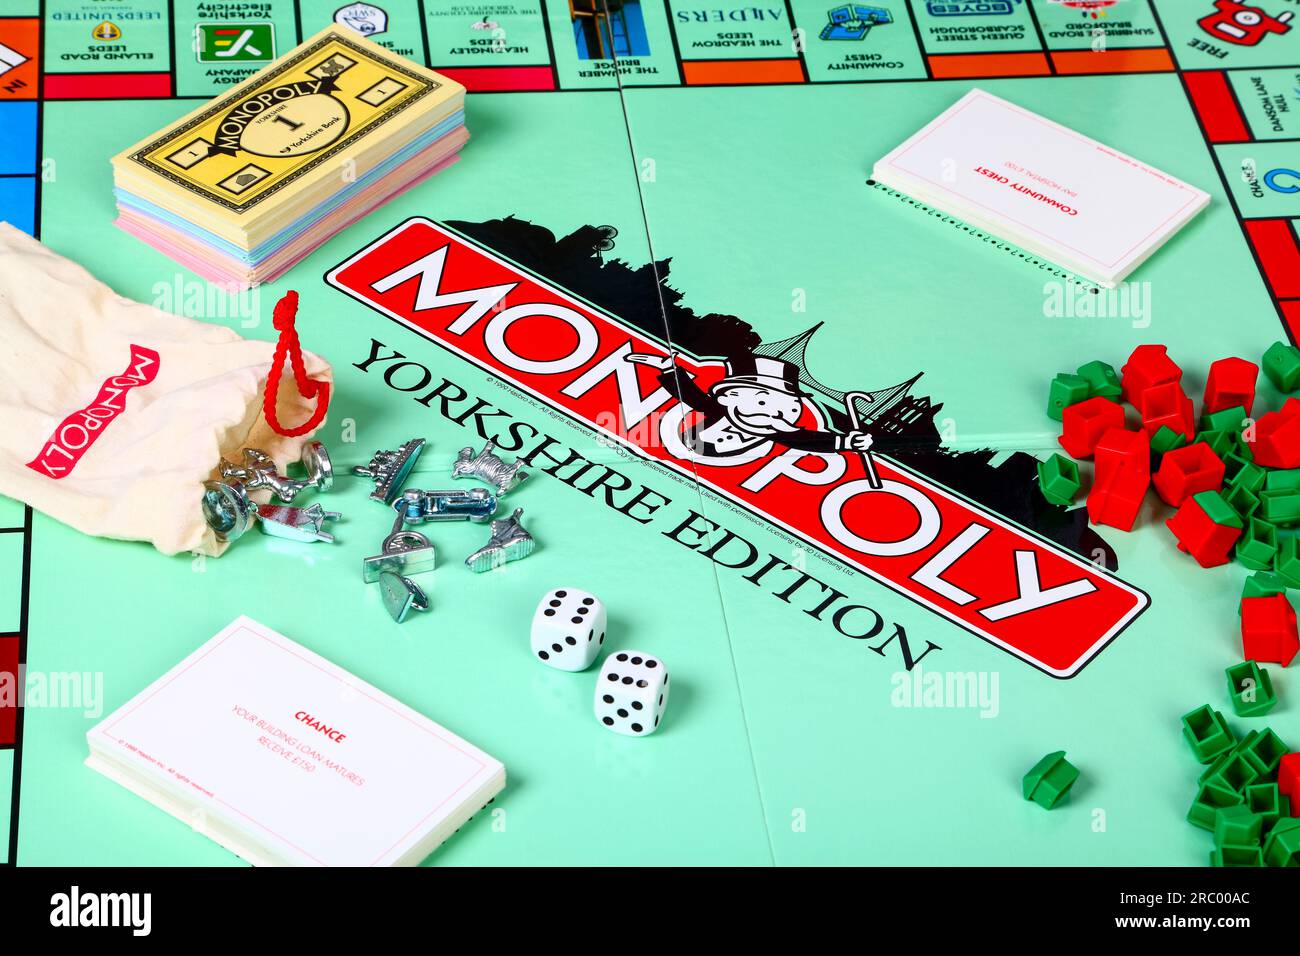 Collectable Yorkshire Monopoly Edition board game Stock Photo